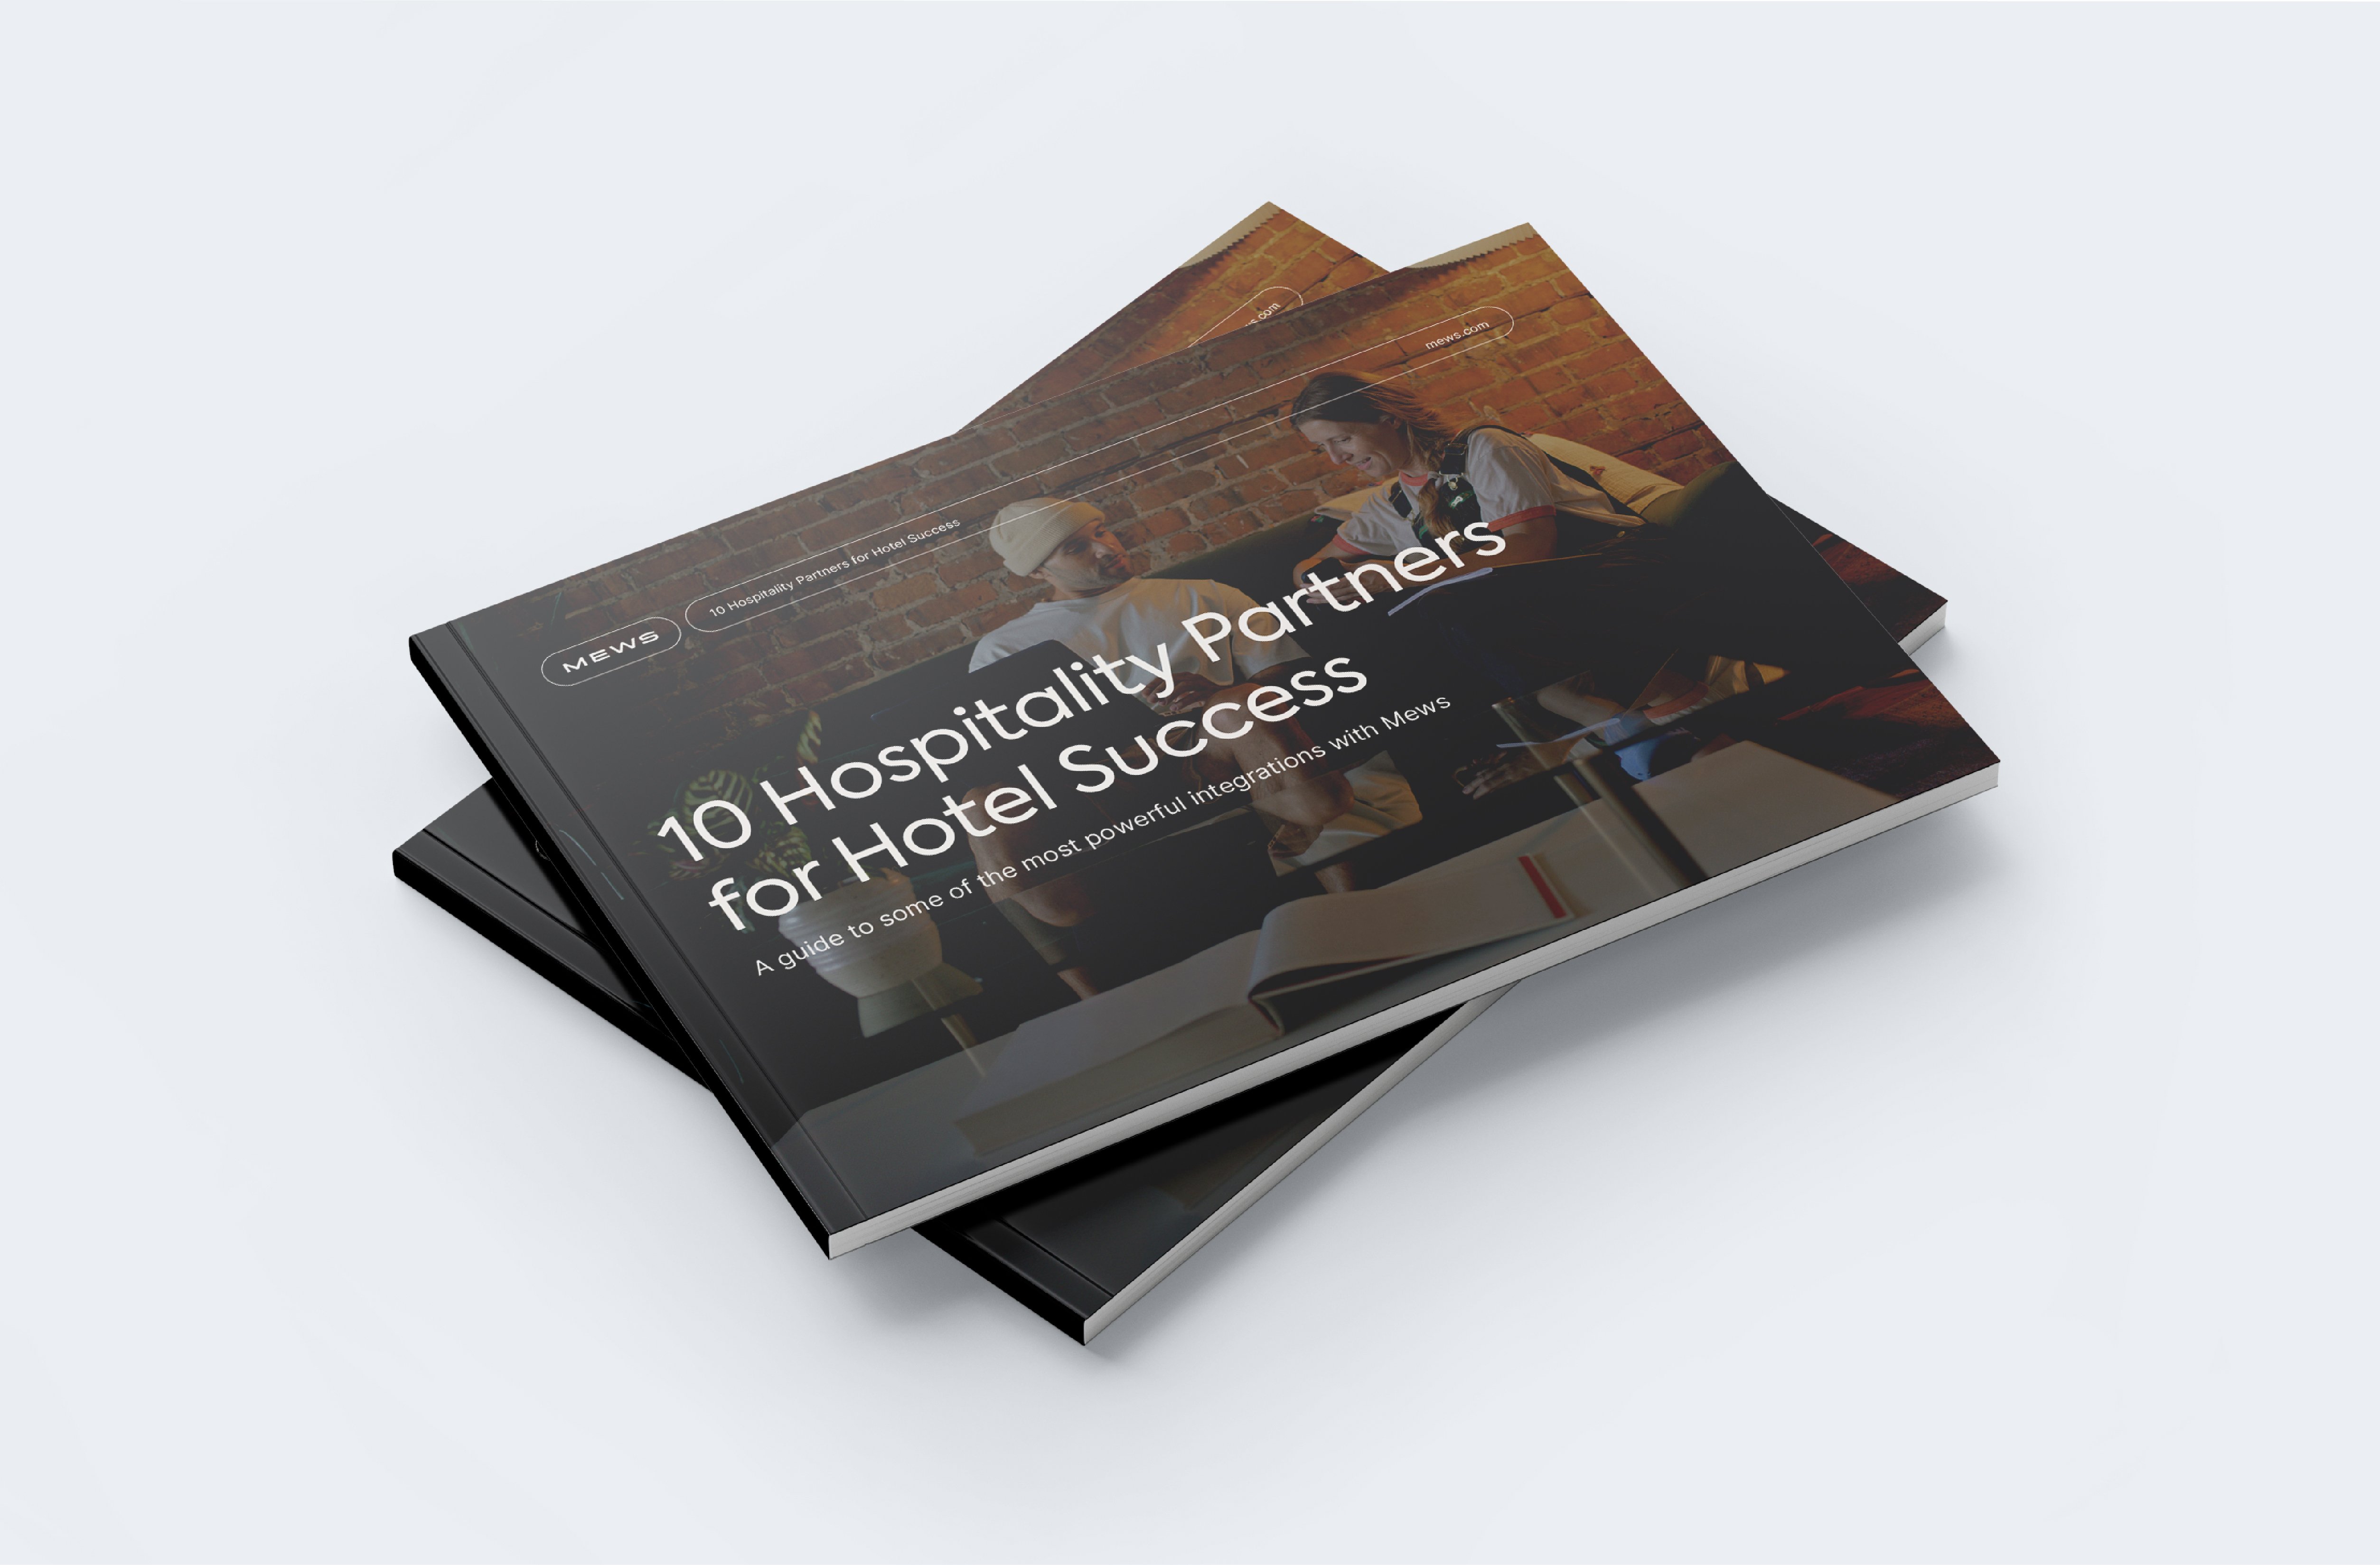 10 Hospitality Partners for Hotel Success thumbnail